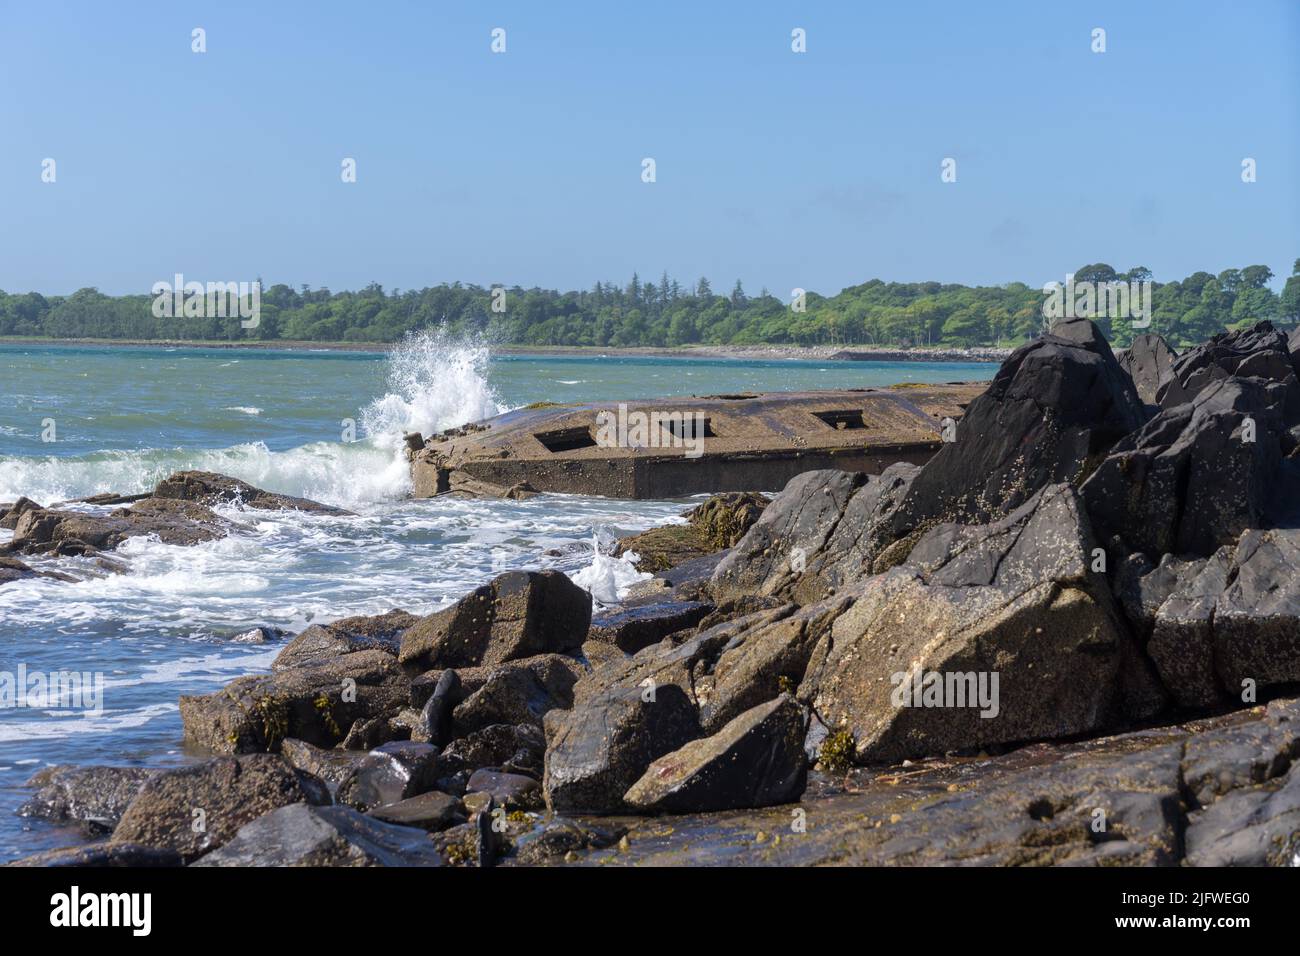 Remains of Mulberry Harbours at Garlieston Bay where they were tested in 1943 Stock Photo